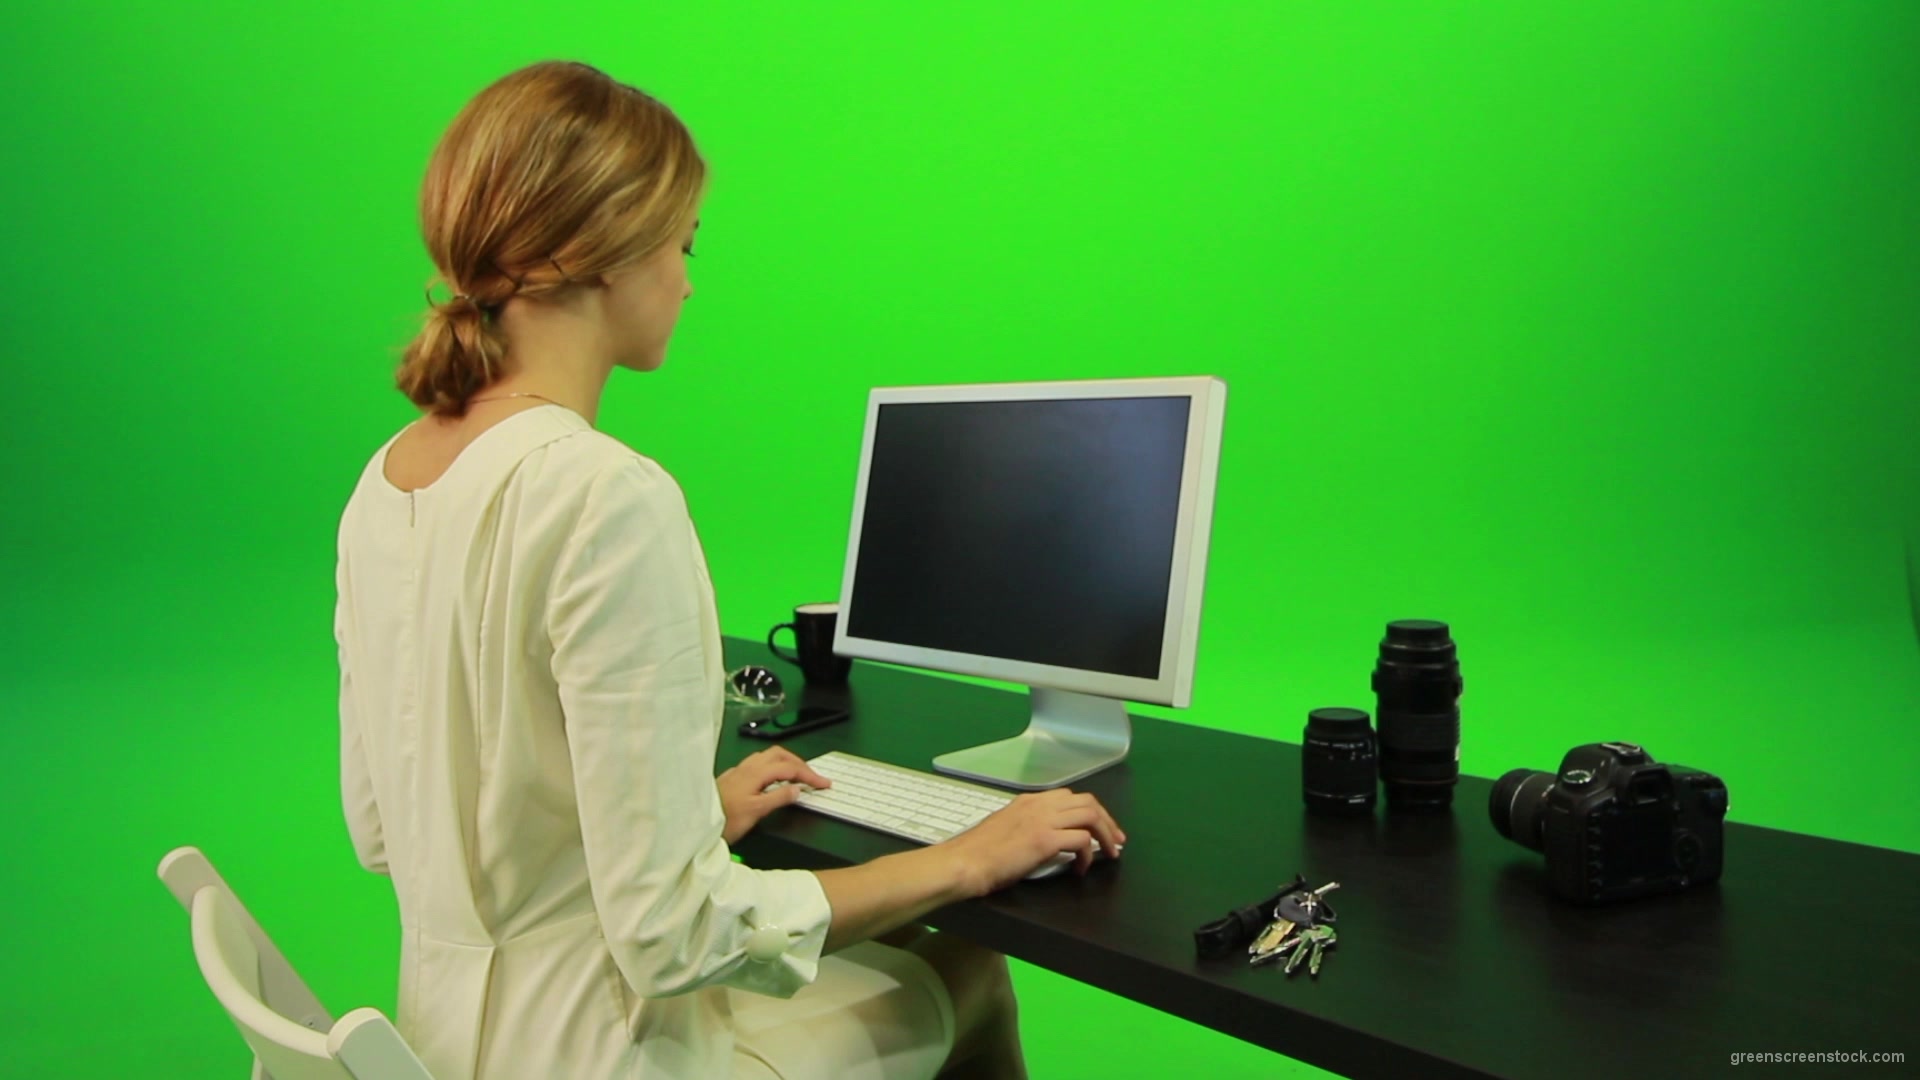 Woman-Sits-Down-and-Works-on-the-Computer-Green-Screen-Footage_006 Green Screen Stock